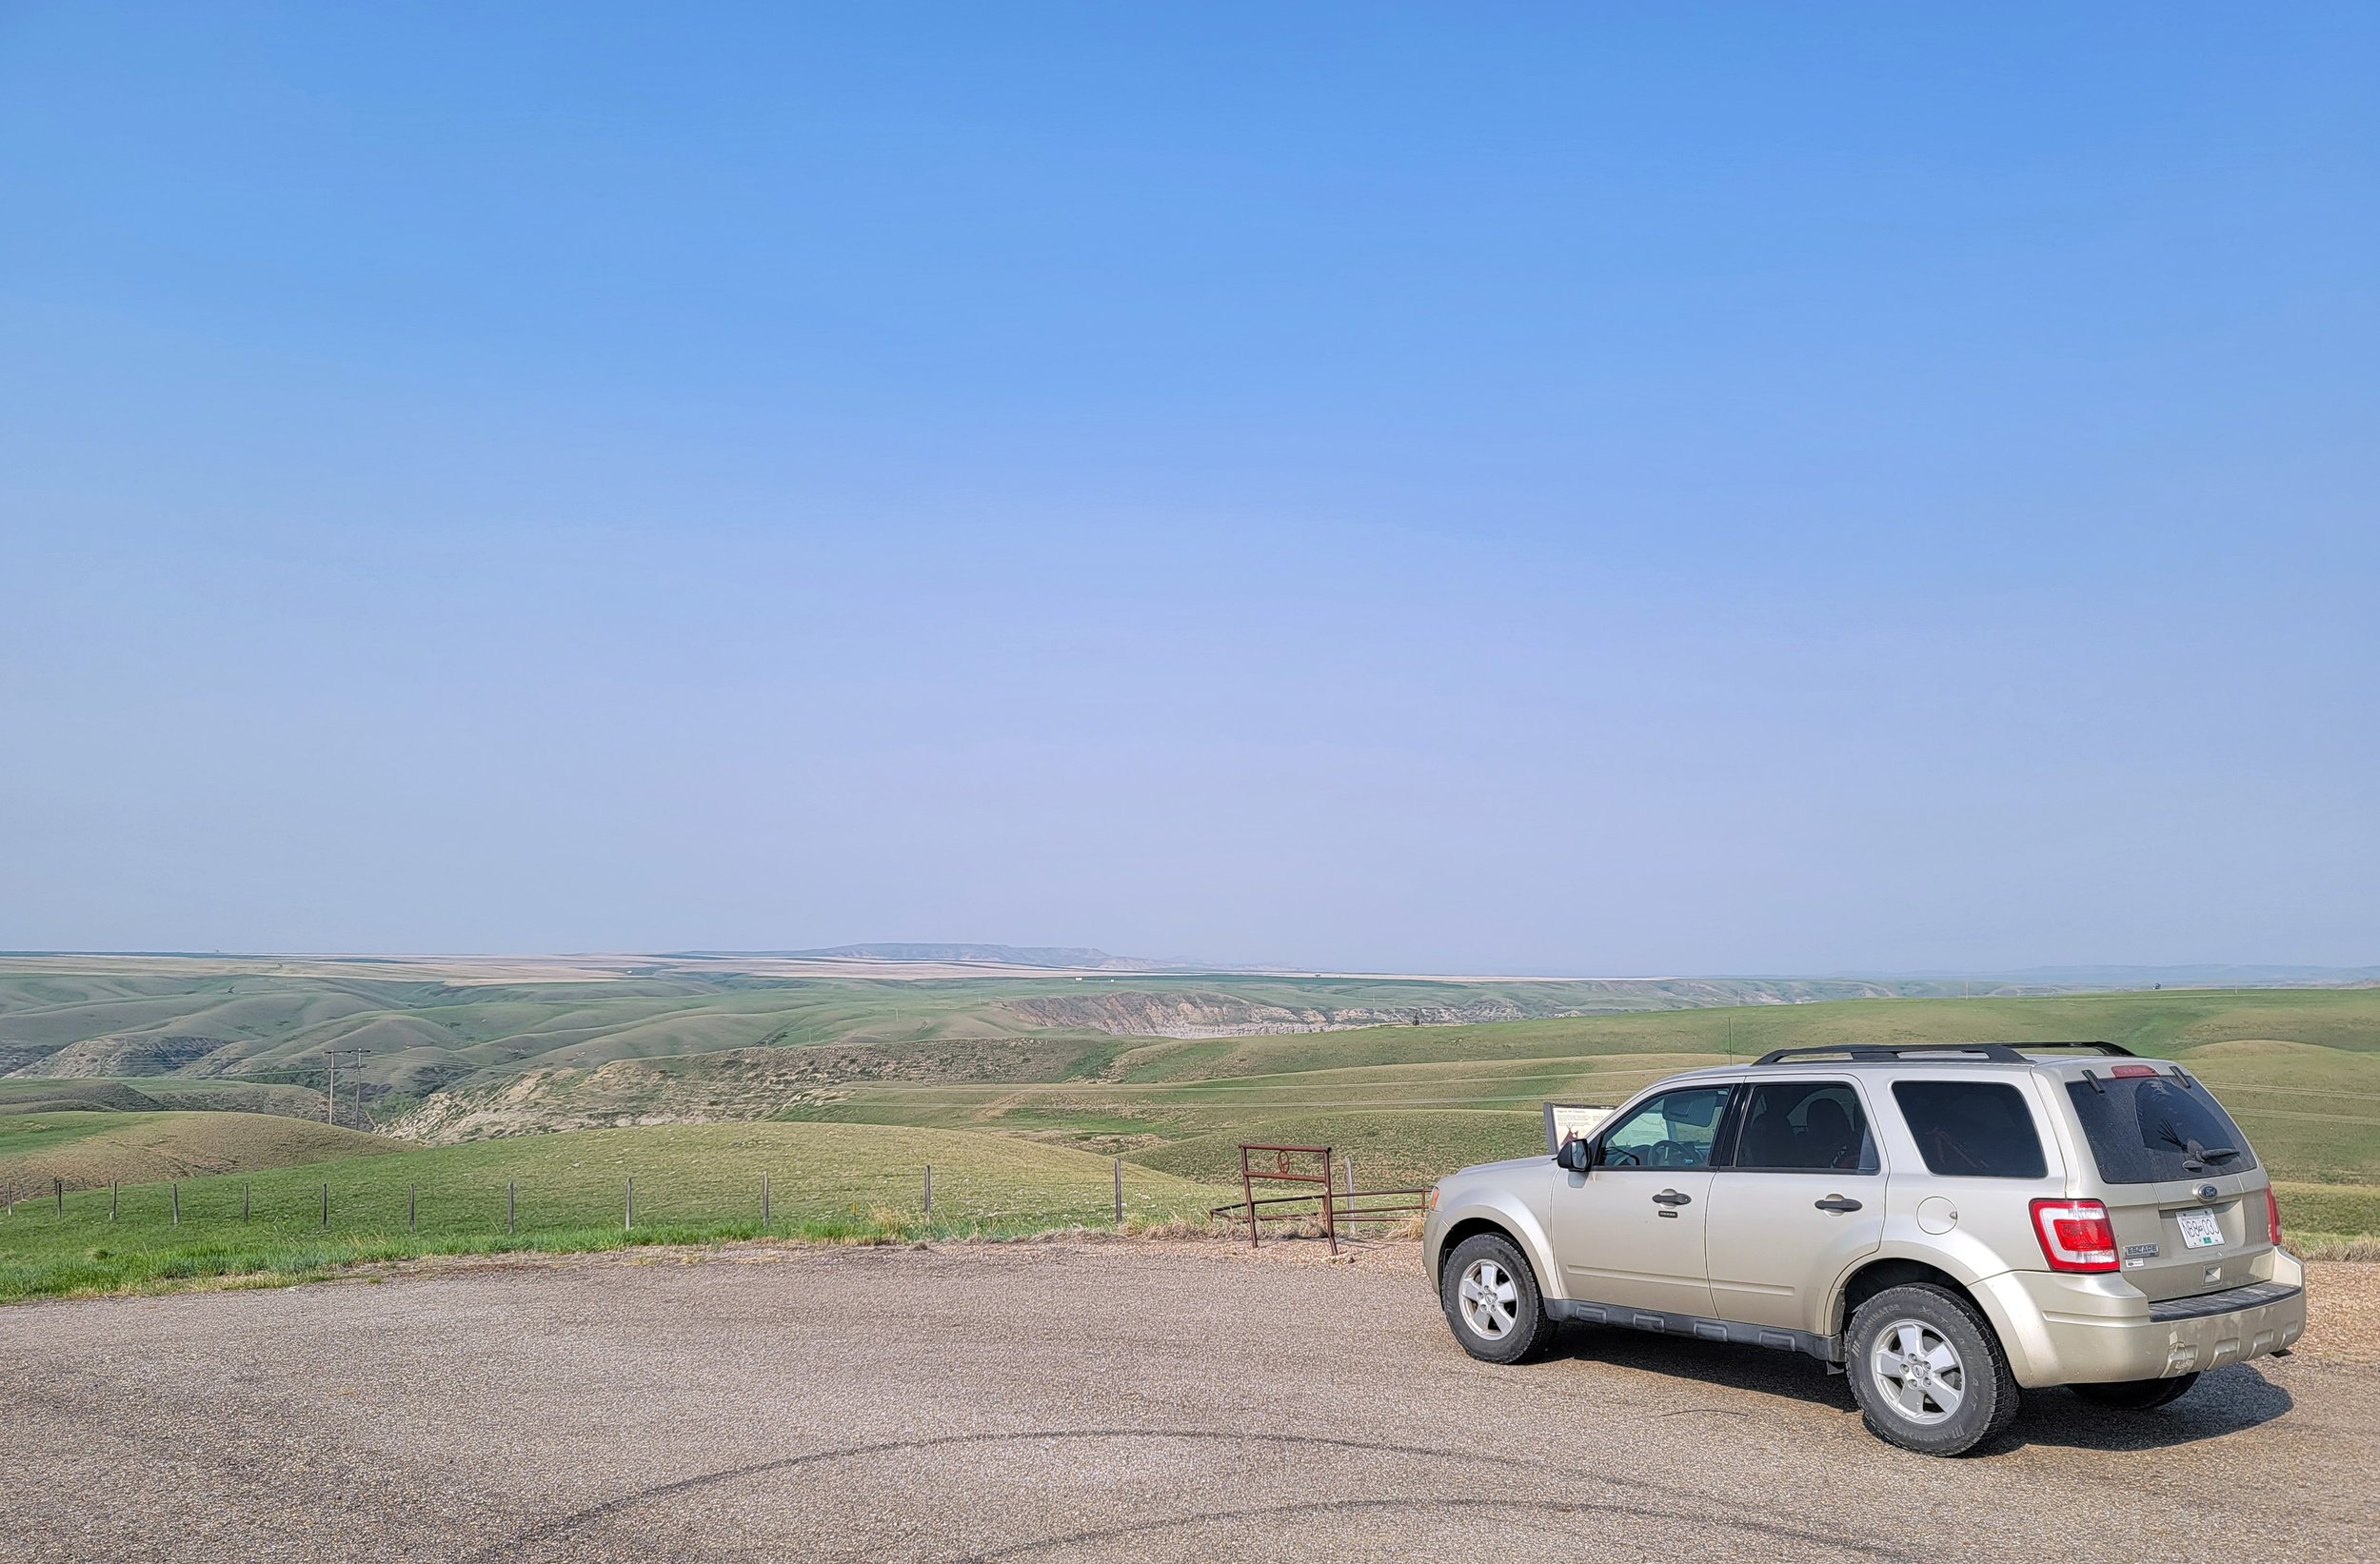 Northern Montana. Rolling grass-covered badlands type landscape. In other words: Alberta.